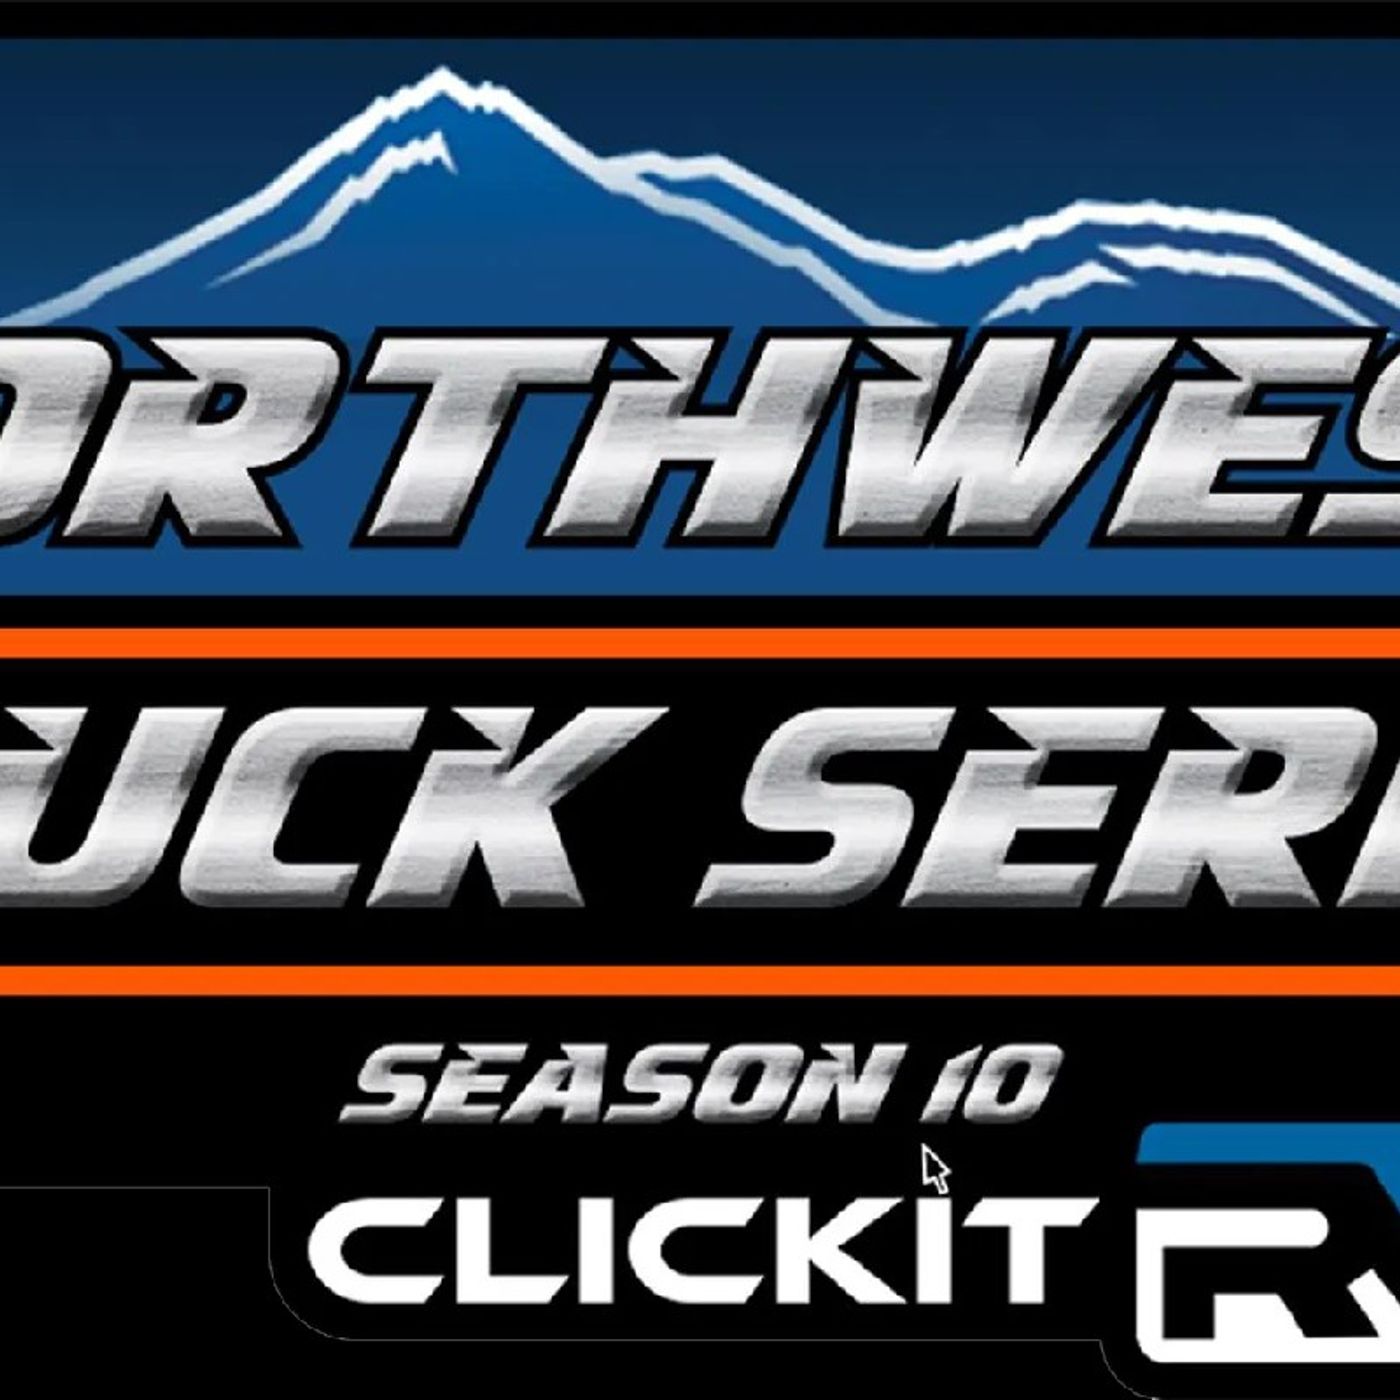 Northwest iRacing Truck Series presented by Click-It RV Round 11 at the virtual Charlotte Motor Speedway! #WeAreCRN #CRNeSports